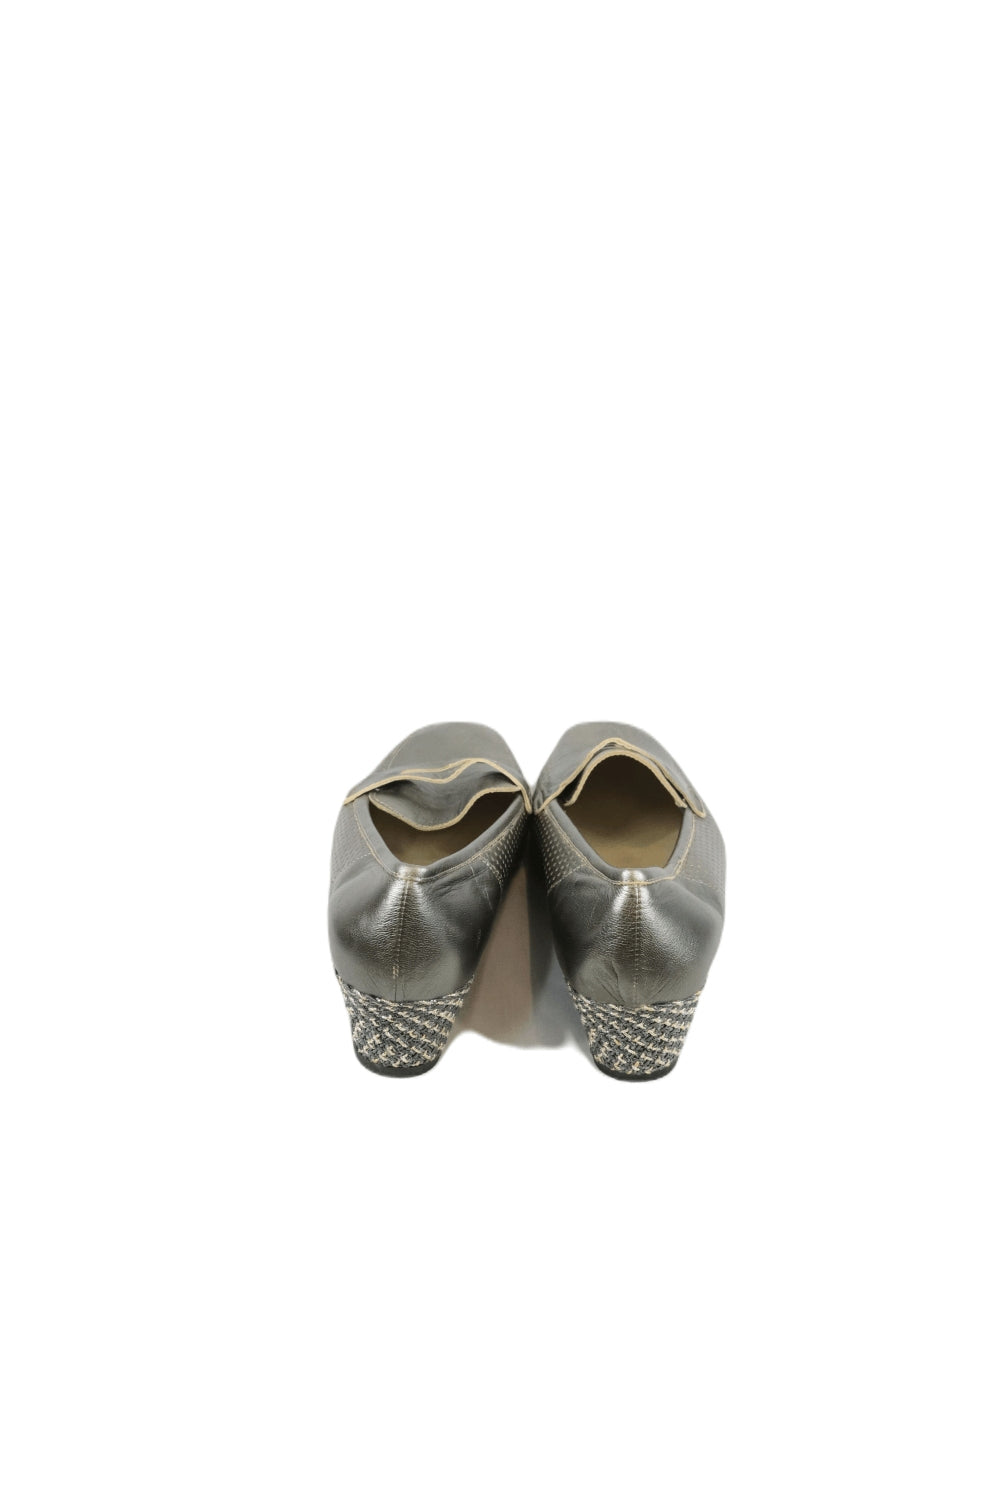 Cinzia Soft Silver Wedge Shoes 10.5